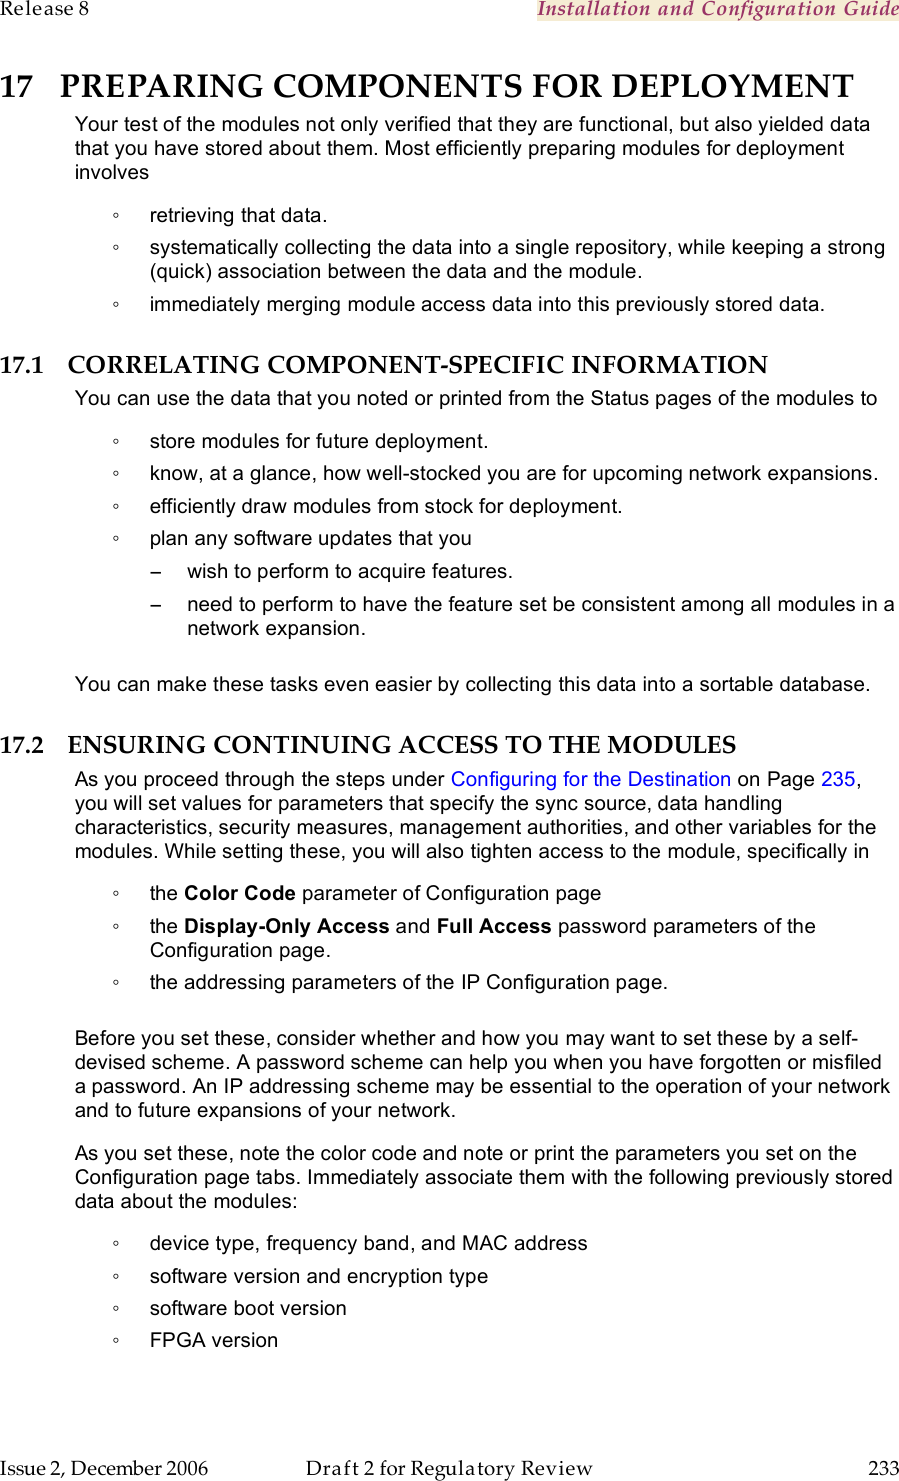 Release 8    Installation and Configuration Guide   Issue 2, December 2006  Draft 2 for Regulatory Review  233     17 PREPARING COMPONENTS FOR DEPLOYMENT Your test of the modules not only verified that they are functional, but also yielded data that you have stored about them. Most efficiently preparing modules for deployment involves ◦  retrieving that data. ◦  systematically collecting the data into a single repository, while keeping a strong (quick) association between the data and the module. ◦  immediately merging module access data into this previously stored data. 17.1 CORRELATING COMPONENT-SPECIFIC INFORMATION You can use the data that you noted or printed from the Status pages of the modules to  ◦  store modules for future deployment. ◦  know, at a glance, how well-stocked you are for upcoming network expansions. ◦  efficiently draw modules from stock for deployment. ◦  plan any software updates that you −  wish to perform to acquire features. −  need to perform to have the feature set be consistent among all modules in a network expansion.  You can make these tasks even easier by collecting this data into a sortable database. 17.2 ENSURING CONTINUING ACCESS TO THE MODULES As you proceed through the steps under Configuring for the Destination on Page 235, you will set values for parameters that specify the sync source, data handling characteristics, security measures, management authorities, and other variables for the modules. While setting these, you will also tighten access to the module, specifically in ◦  the Color Code parameter of Configuration page ◦  the Display-Only Access and Full Access password parameters of the Configuration page. ◦  the addressing parameters of the IP Configuration page.  Before you set these, consider whether and how you may want to set these by a self-devised scheme. A password scheme can help you when you have forgotten or misfiled a password. An IP addressing scheme may be essential to the operation of your network and to future expansions of your network. As you set these, note the color code and note or print the parameters you set on the Configuration page tabs. Immediately associate them with the following previously stored data about the modules: ◦  device type, frequency band, and MAC address ◦  software version and encryption type ◦  software boot version ◦  FPGA version 